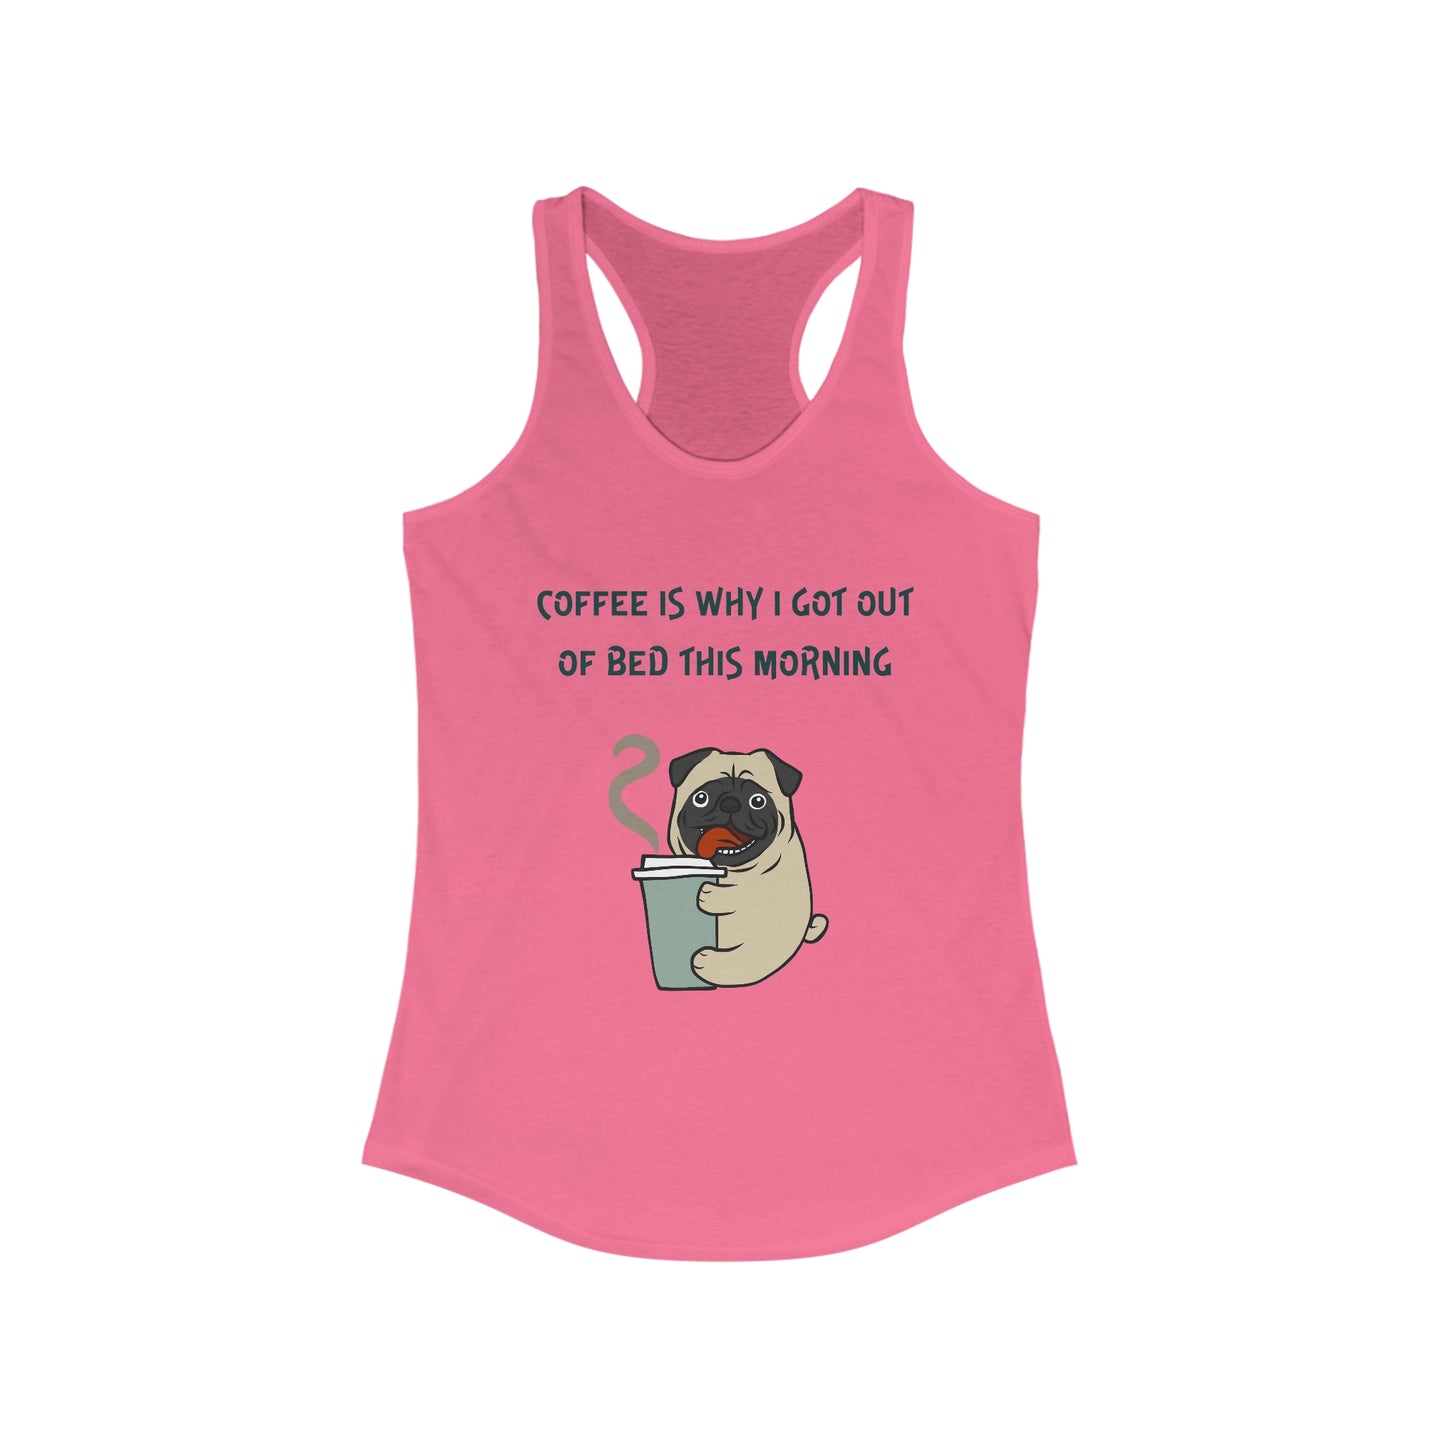 Pete The Bull Dog. Coffee Is Why I Got Out of Bed This Morning. Women's Ideal Racerback Tank